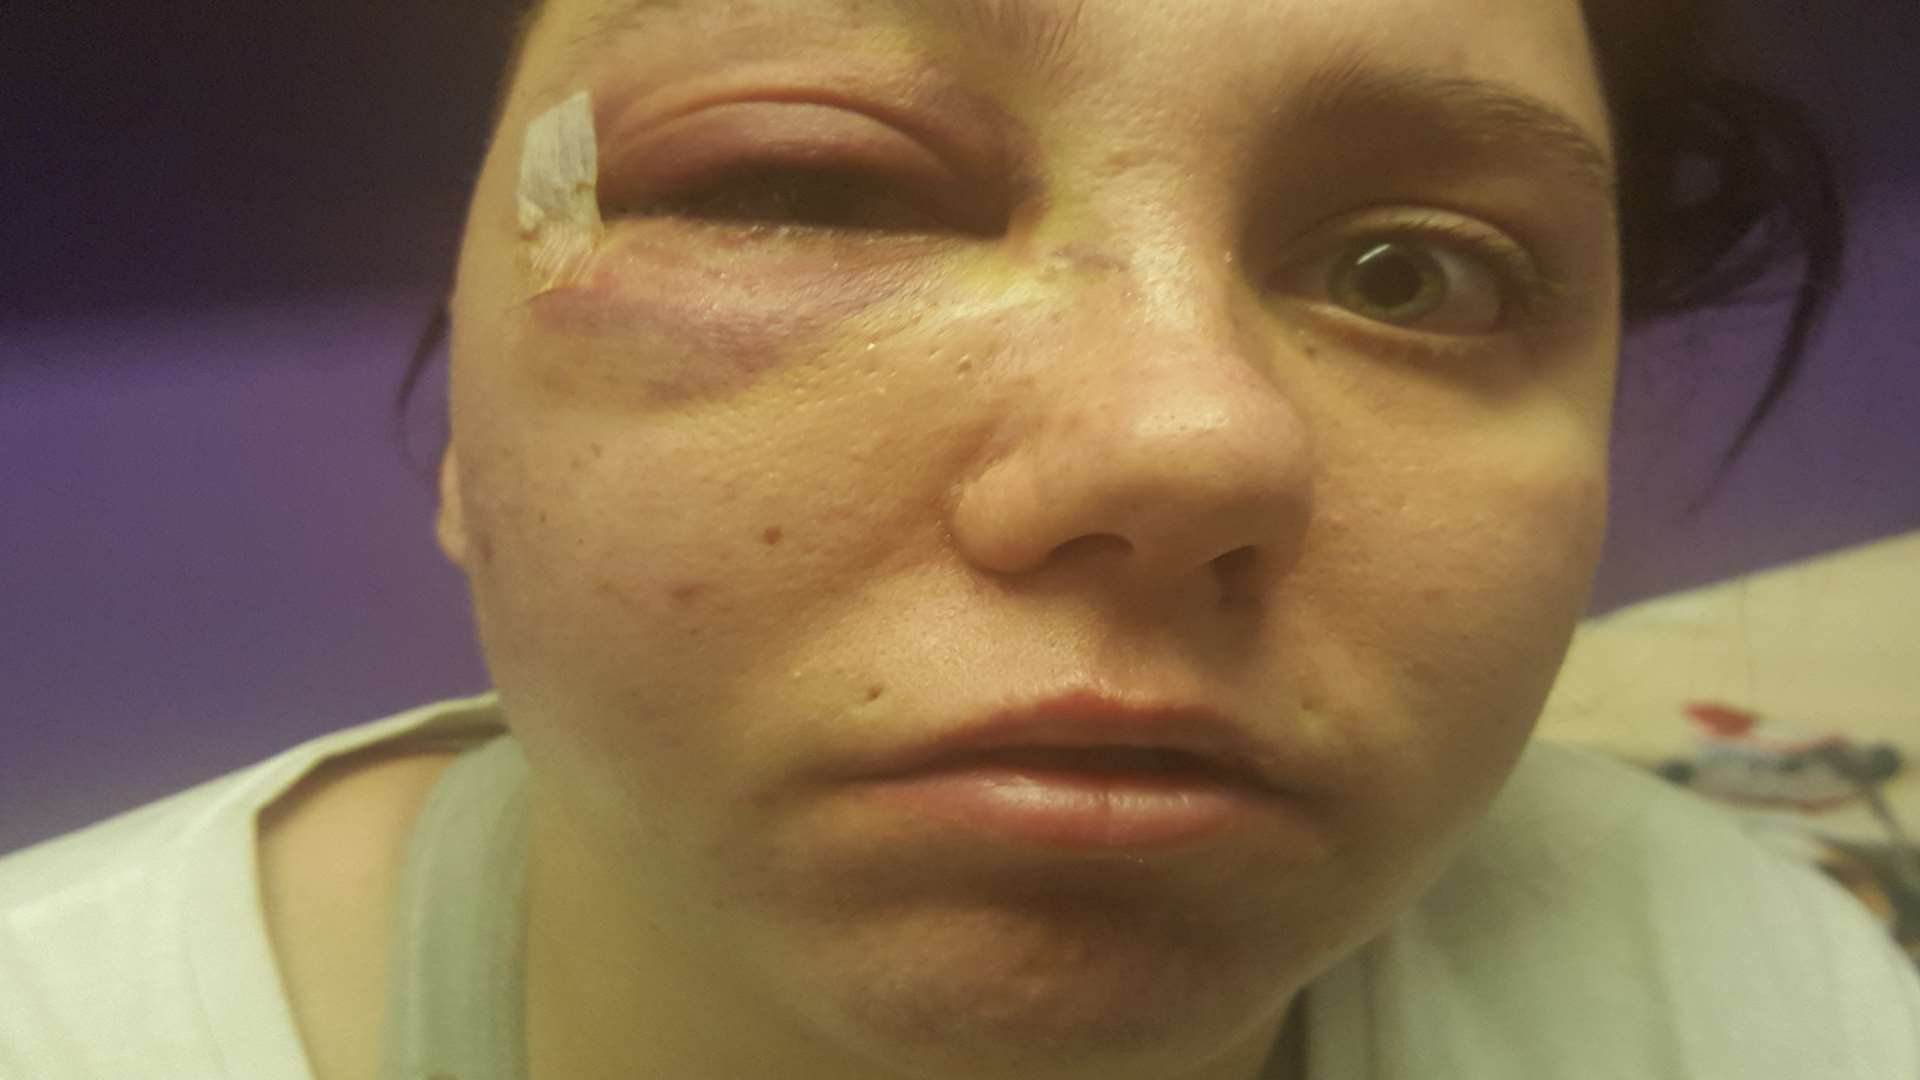 Cora's eye was left badly swollen and bruised